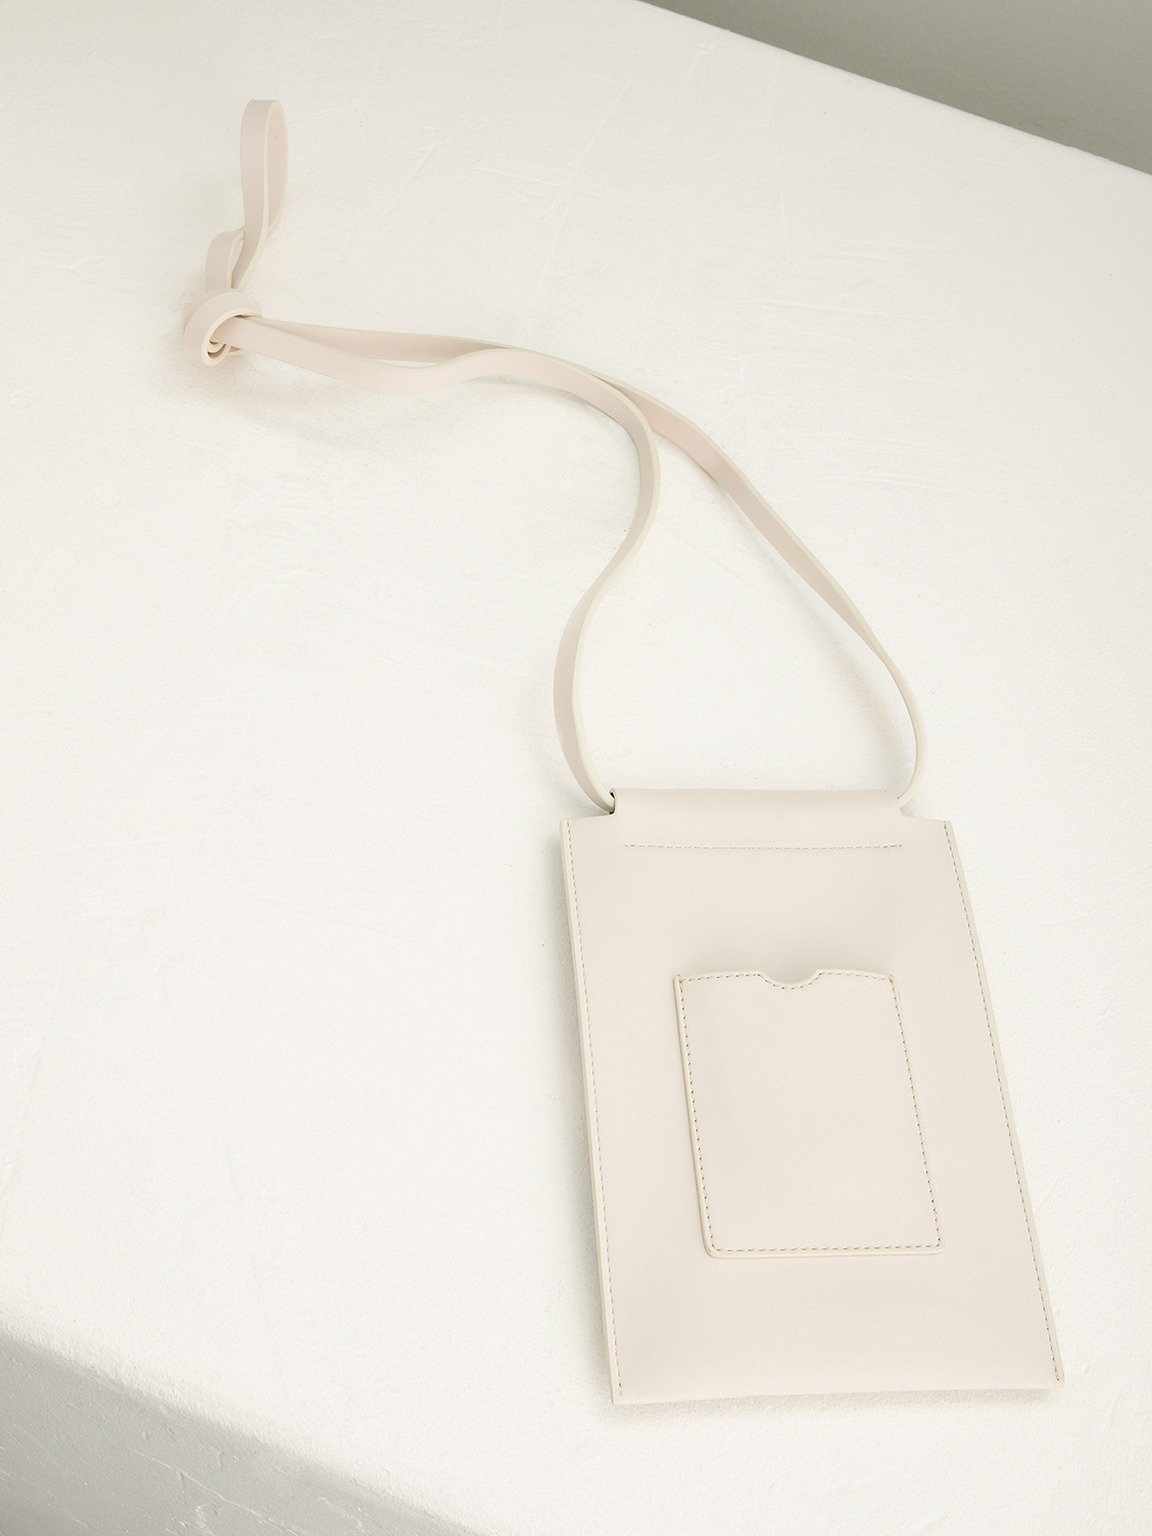 Trip Phone Pouch with Lanyard, Beige